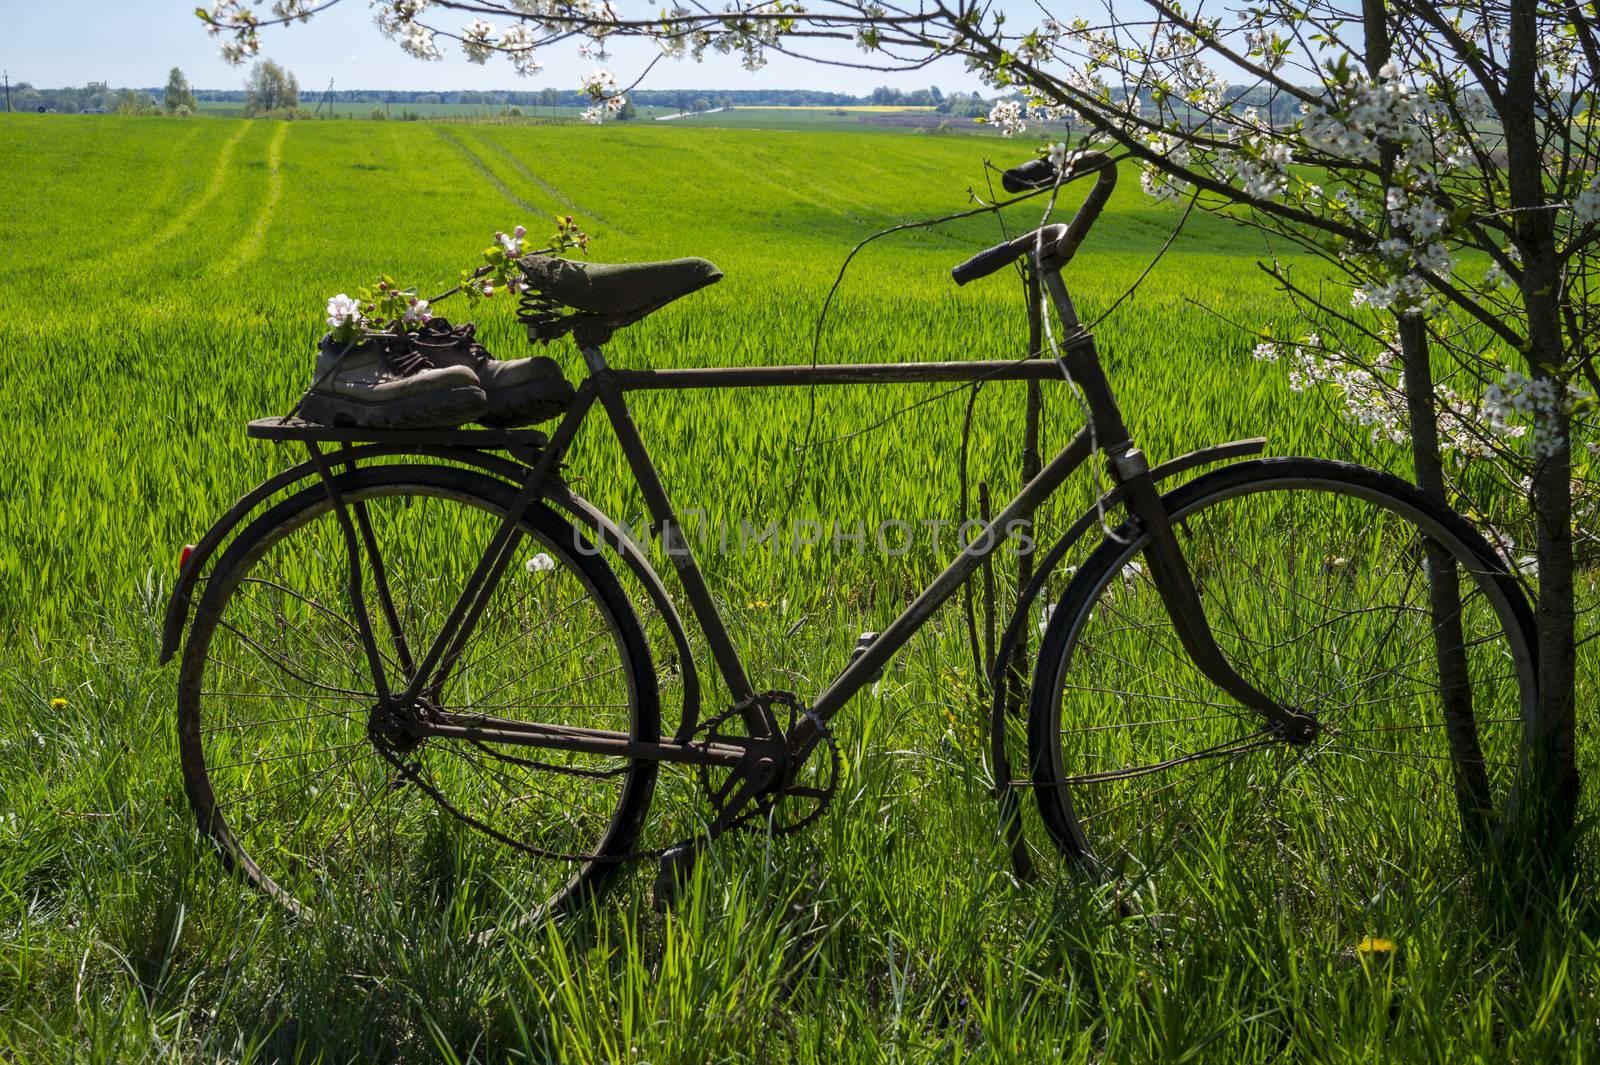 Old bicycle with pair of hiking boots strung over the seat standing in front of flowering bushes of white flowers in a spring garden